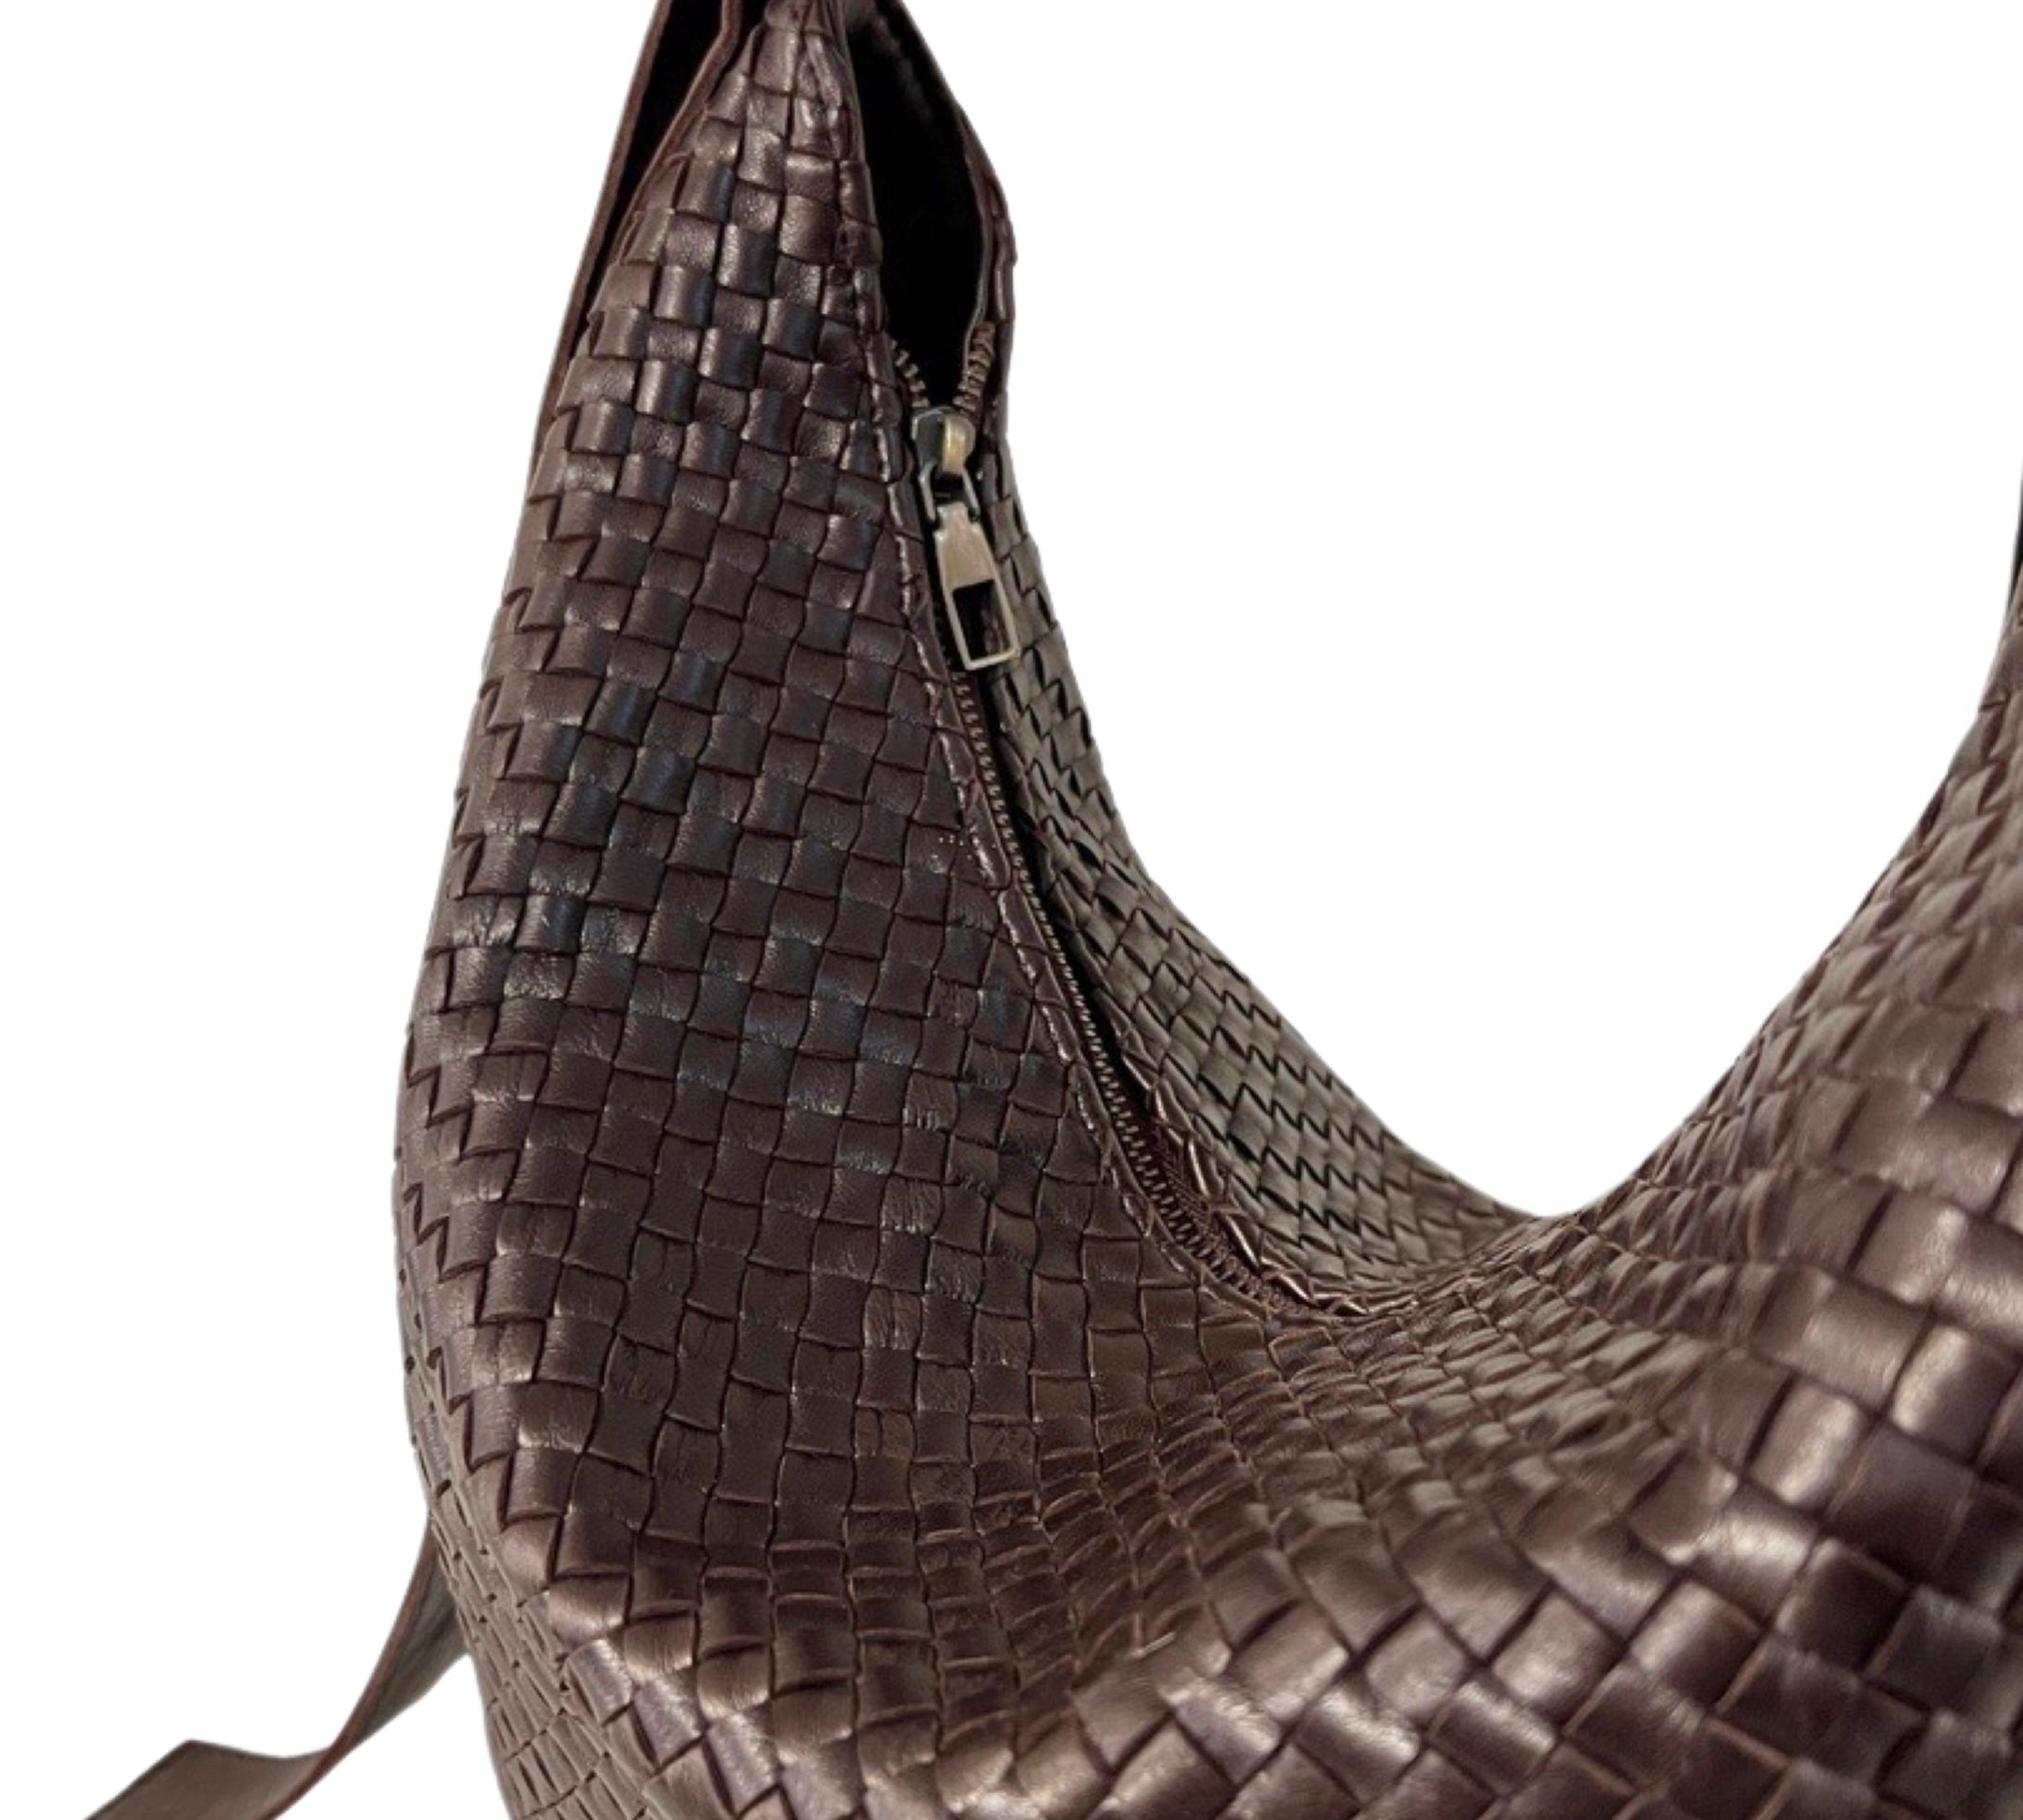 LABEL17 presents the Saddle Bag Tresse in Darkbrown, made of supple, hand-braided Lamb-Nappaleather